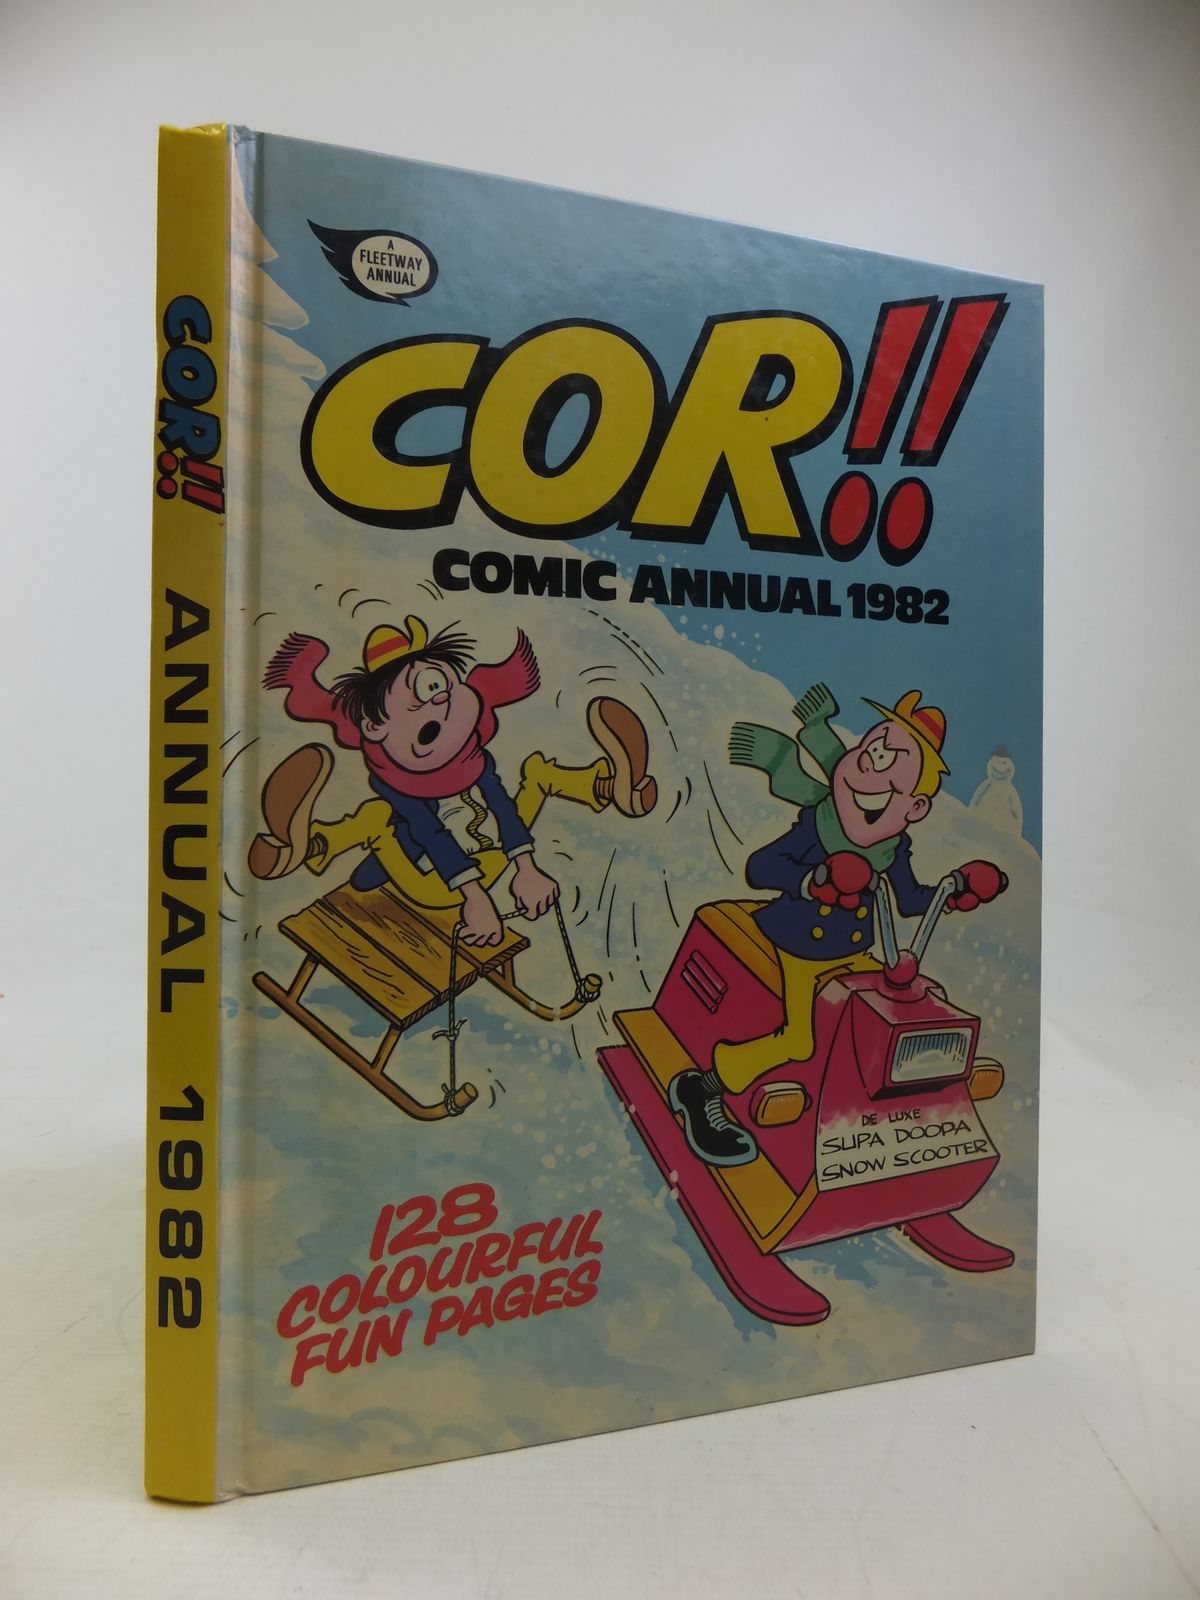 Photo of COR!! COMIC ANNUAL 1982 published by IPC Magazines Ltd. (STOCK CODE: 2116976)  for sale by Stella & Rose's Books